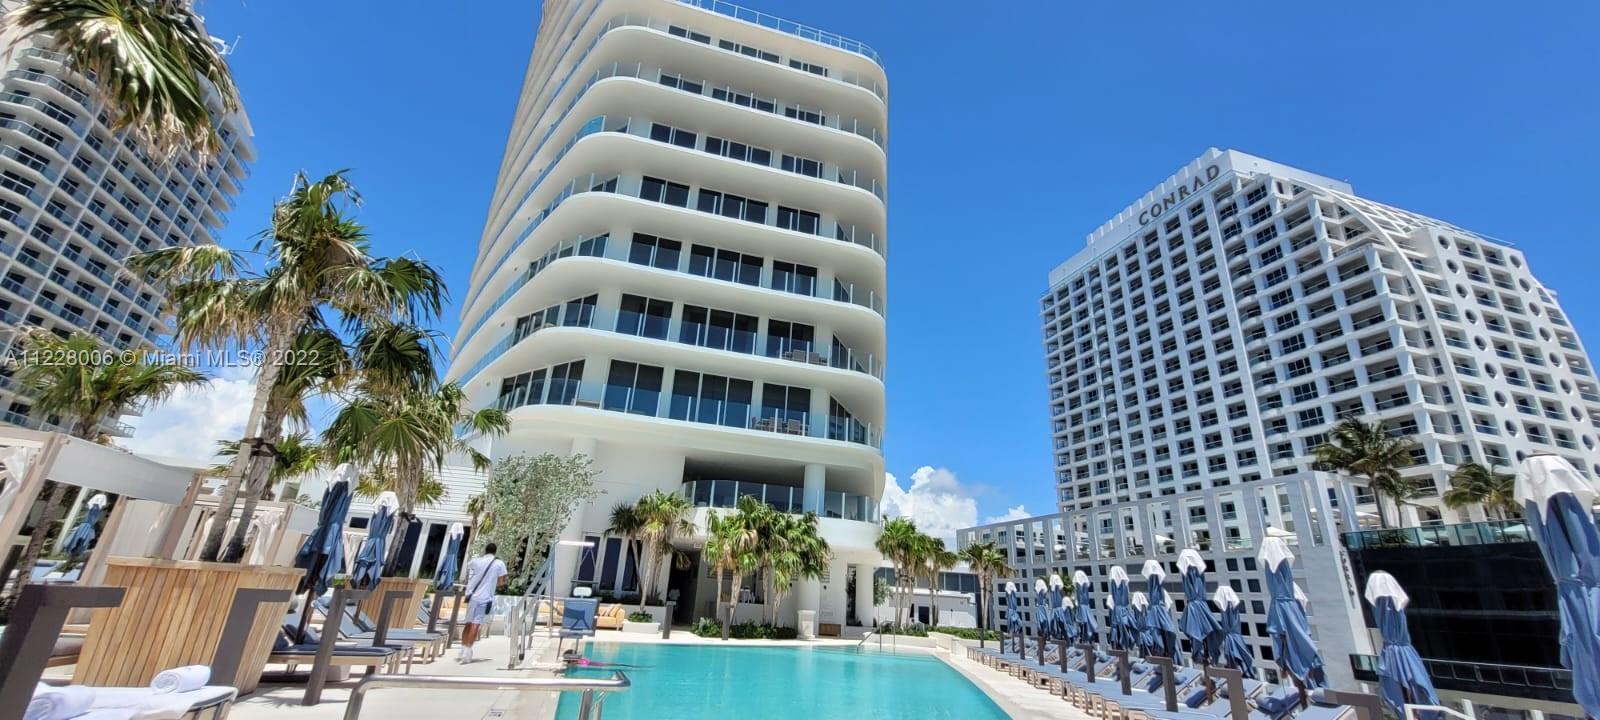 FURNISHED UNIT!! New Four Seasons Condo Hotel Residences.  Private hotel residence with ocean views and intercoastal view